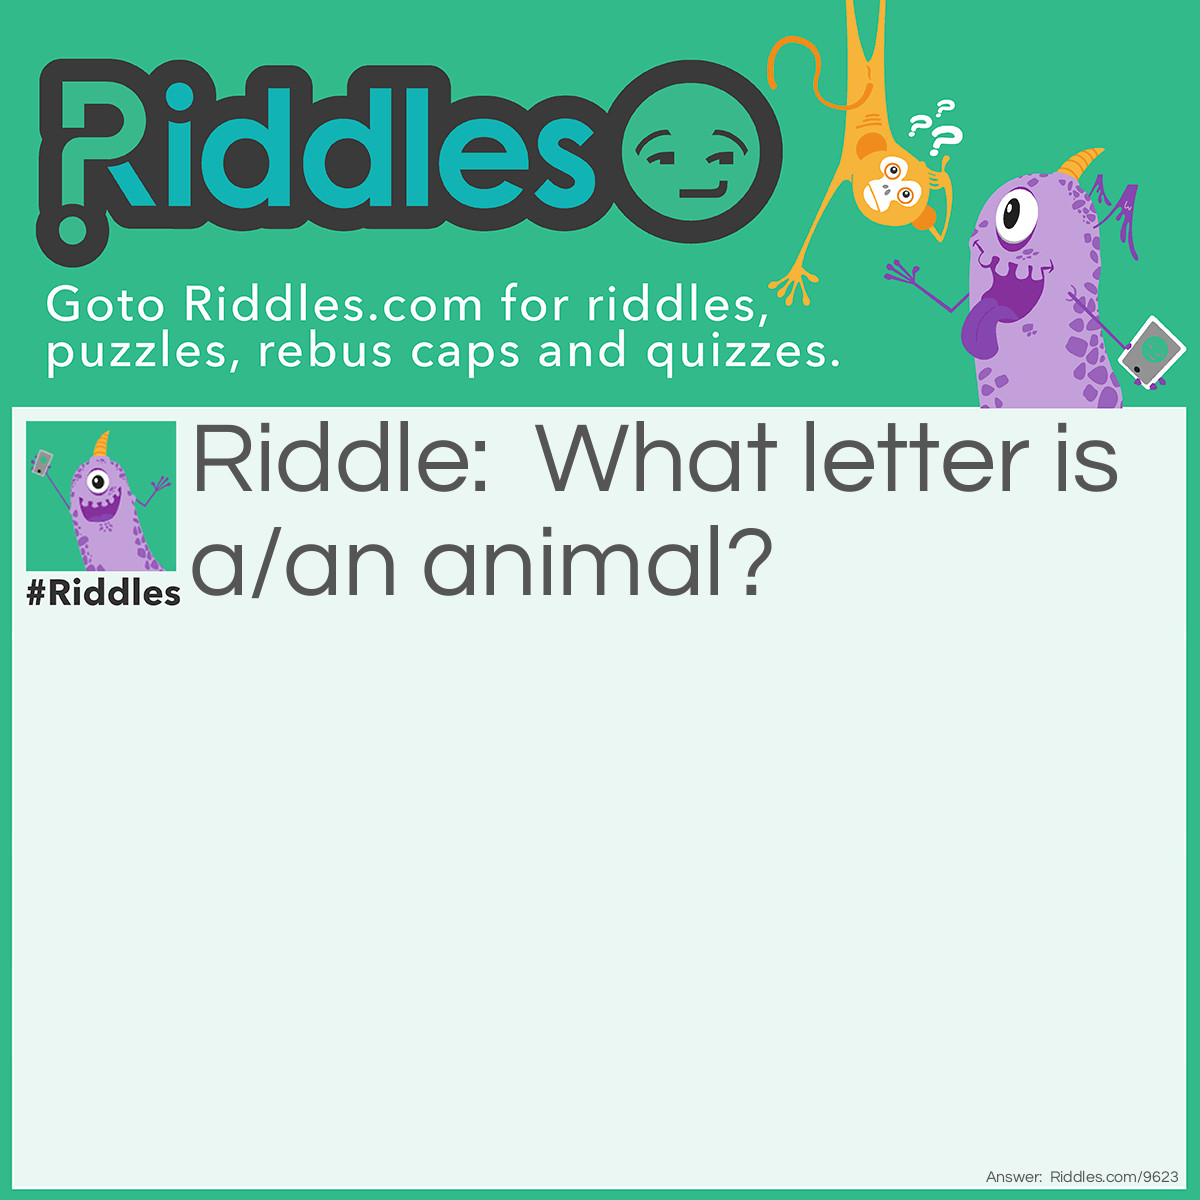 Riddle: What letter is a/an animal? Answer: B-(bee)